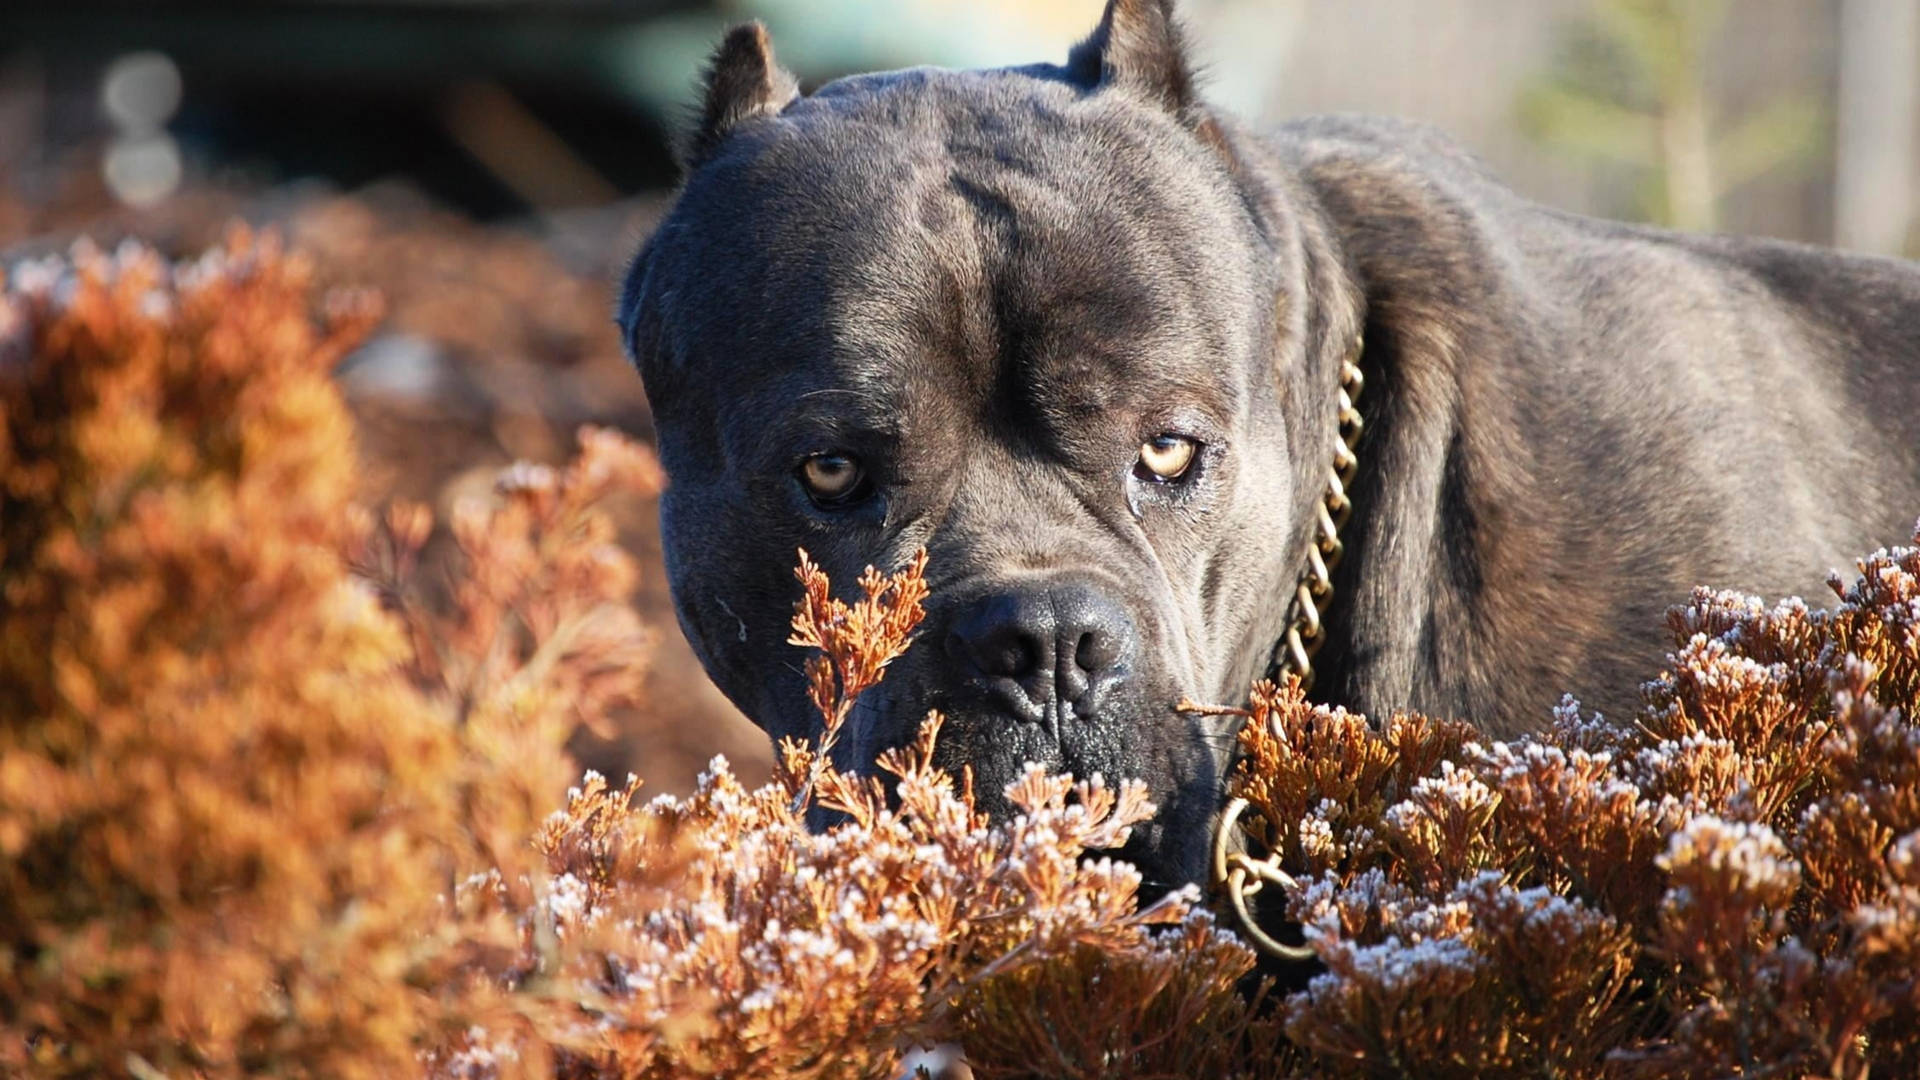 Alert-looking Cane Corso Background